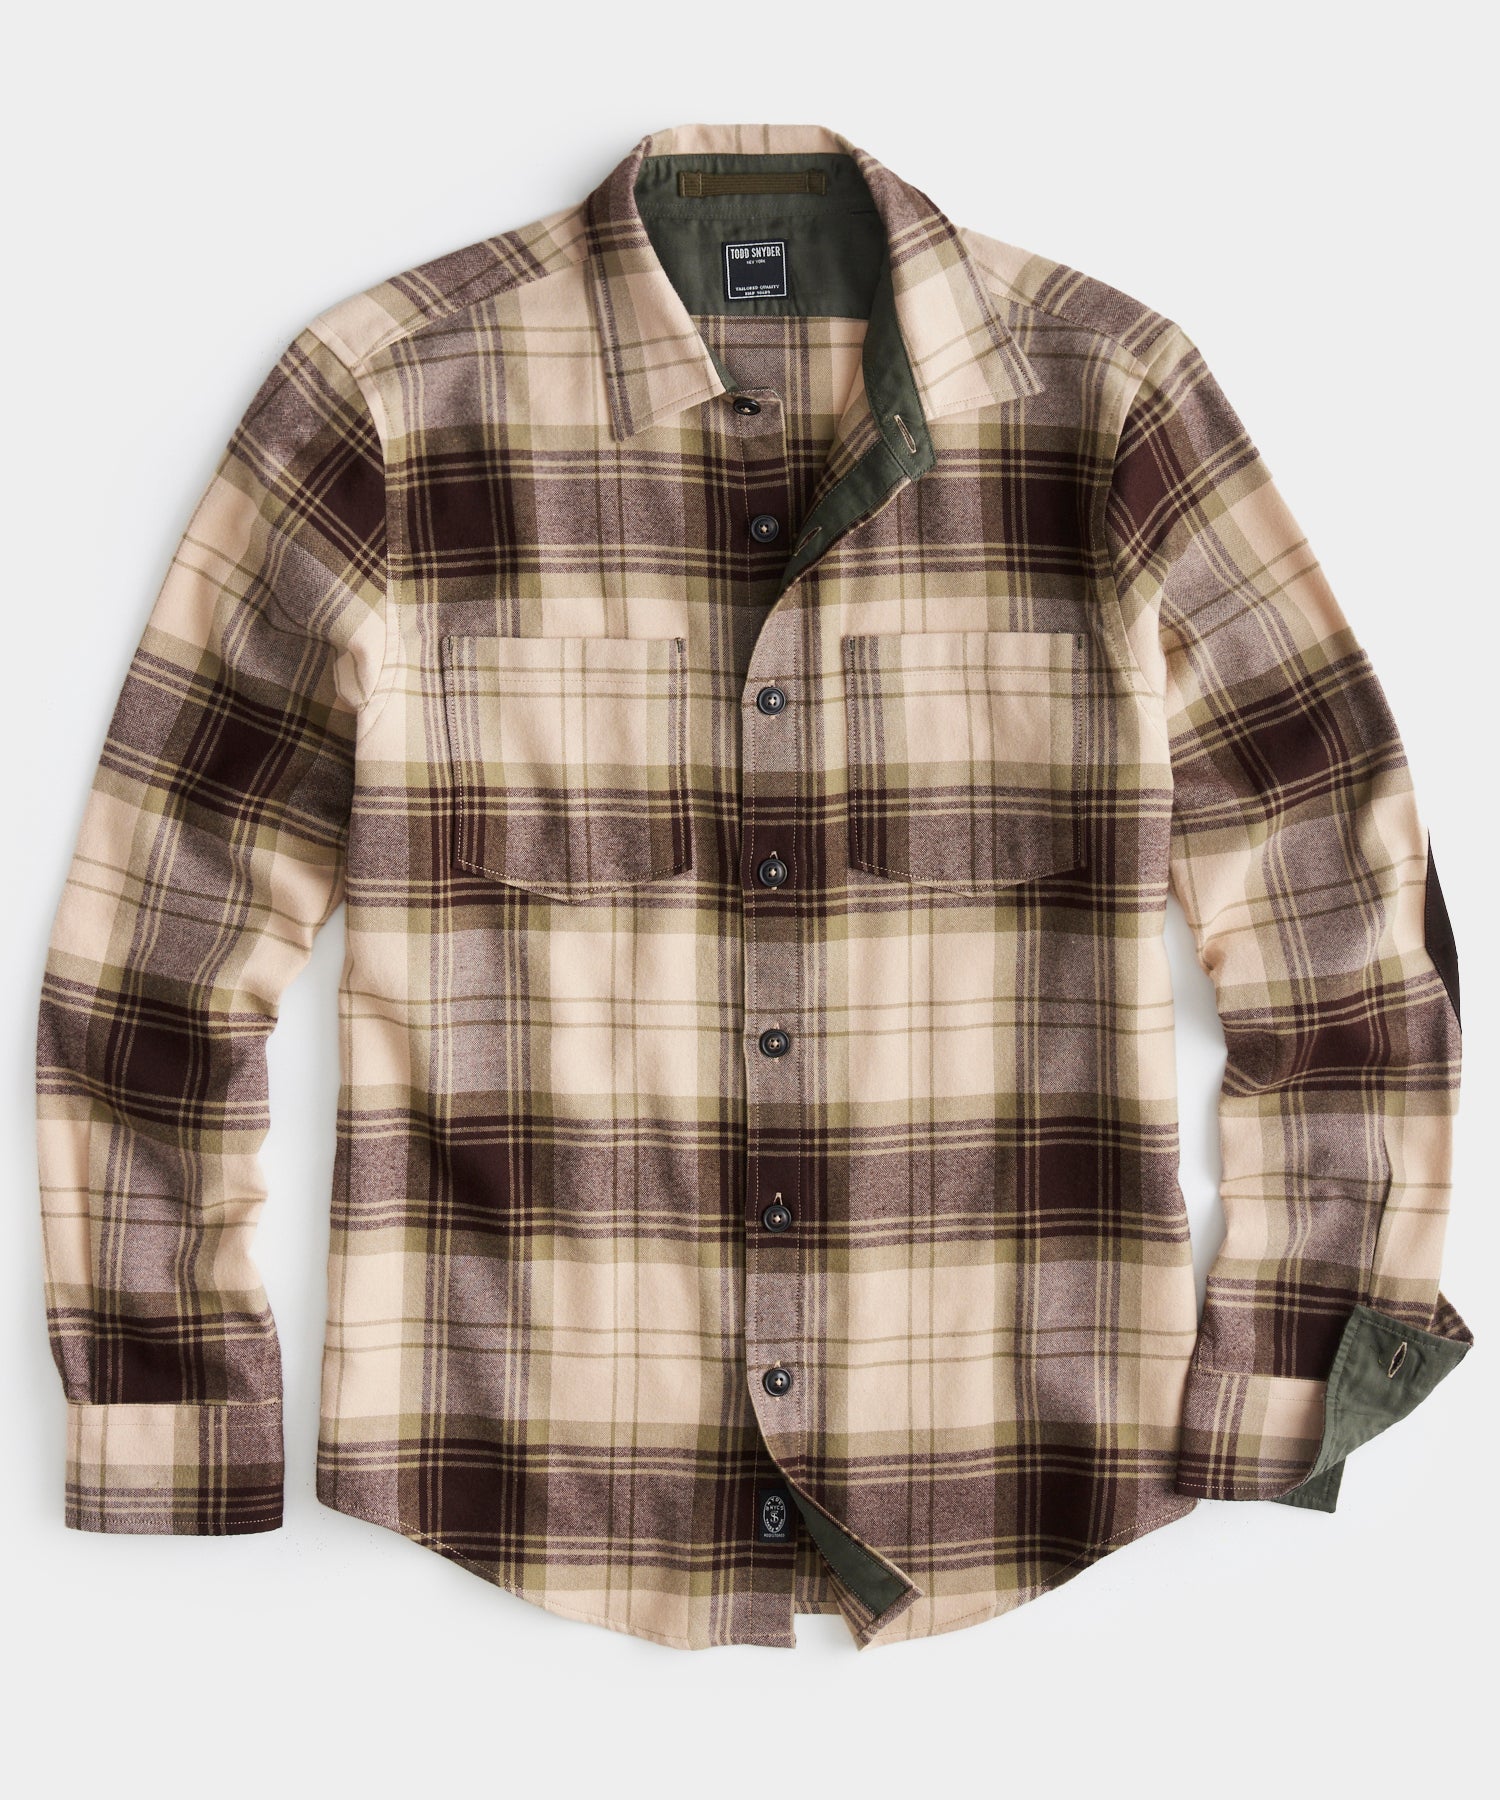 Todd Snyder - TODD SNYDER MULTI-PLAID ITALIAN FLANNEL OVERSHIRT IN KHAKI - Rent With Thred